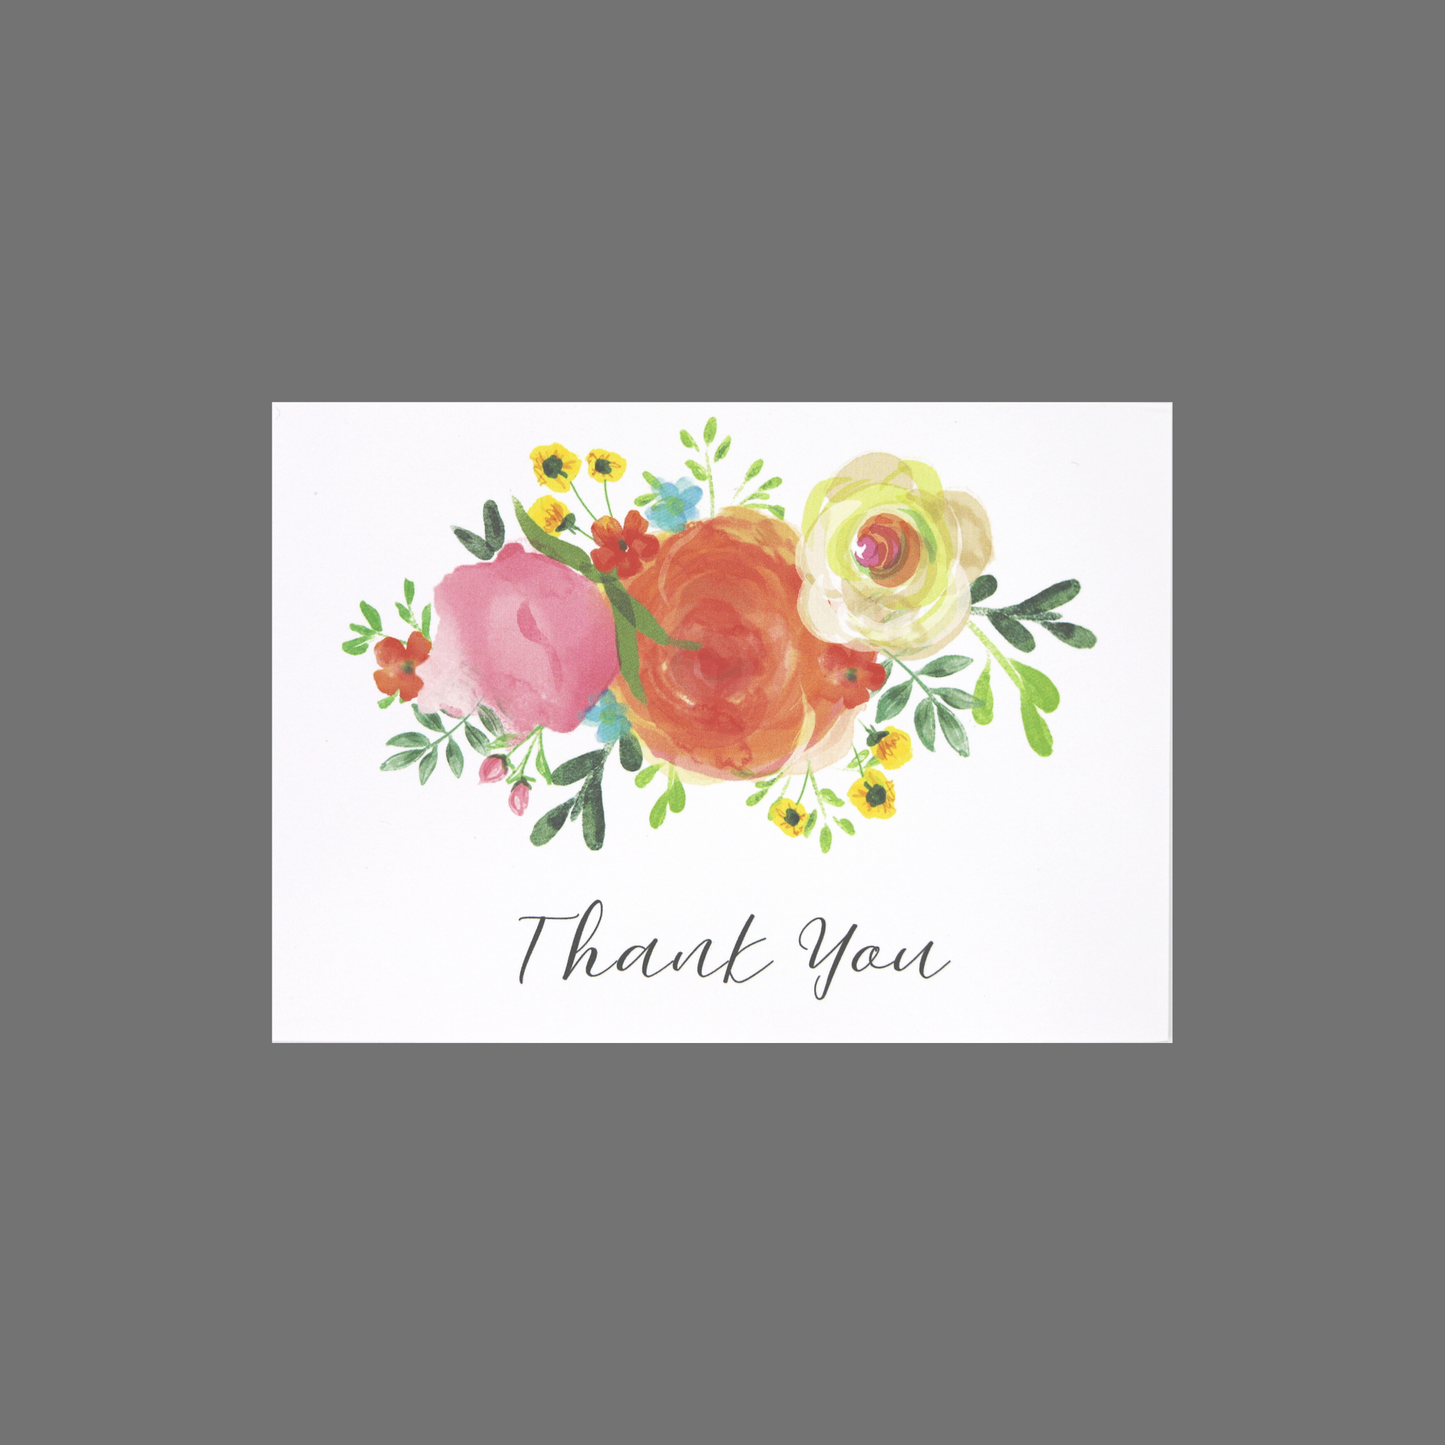 Pack of 8 - "Thank You" with Pink, Orange and White Flowers (10082)